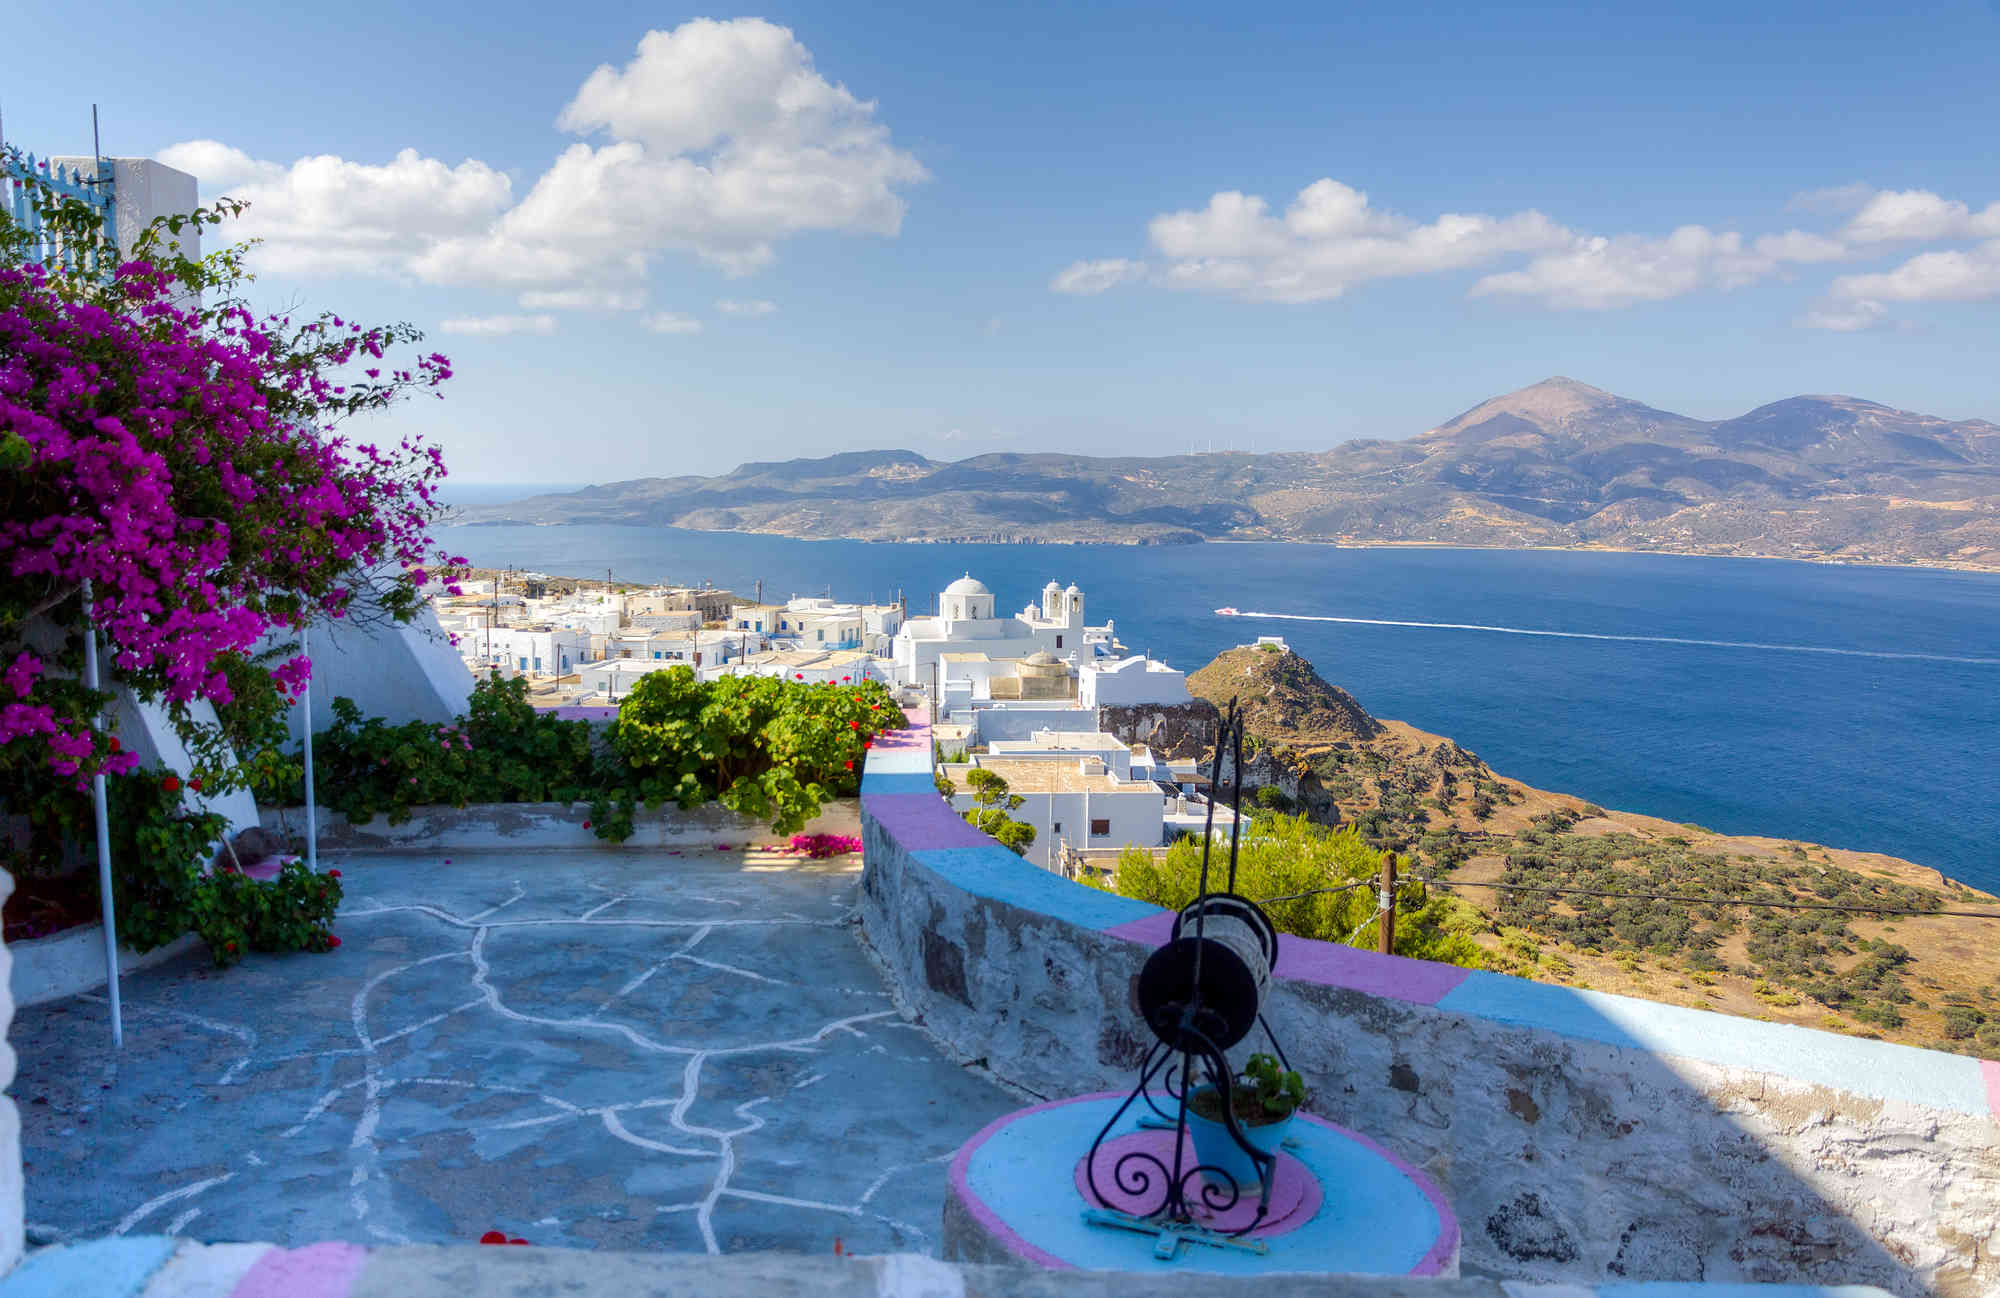 A dream holiday in the Cyclades